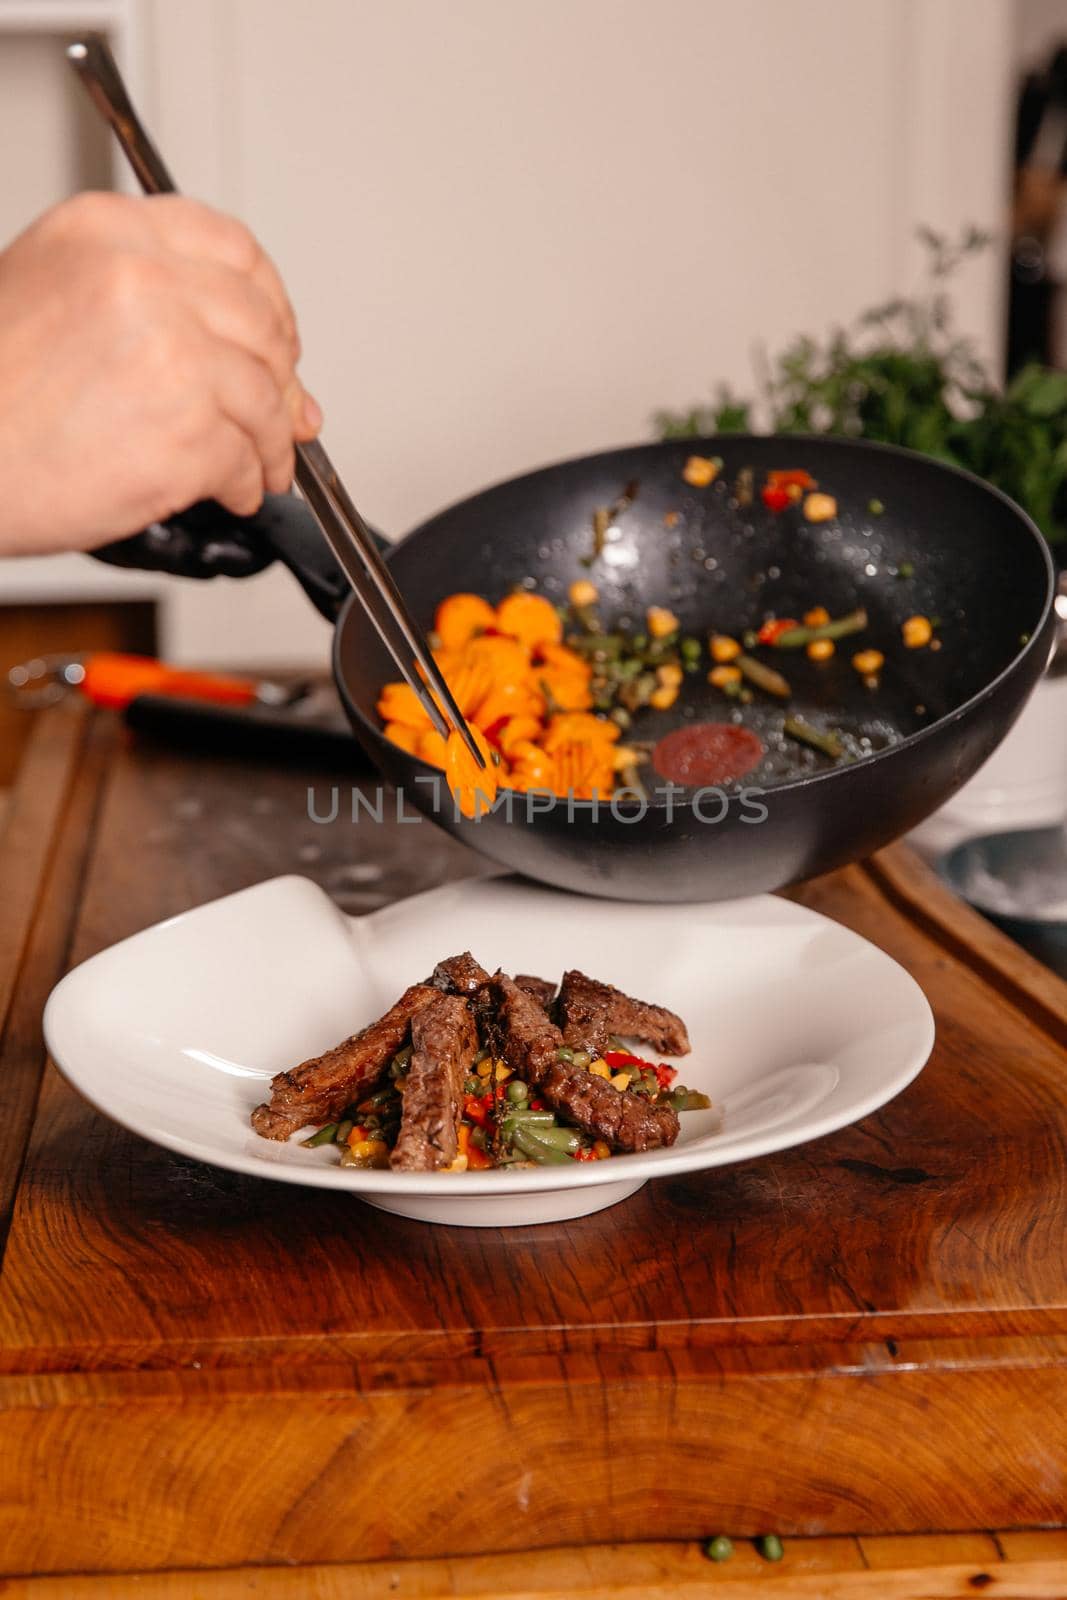 Beef Meal Decorated with Carrot. Plating. by RecCameraStock